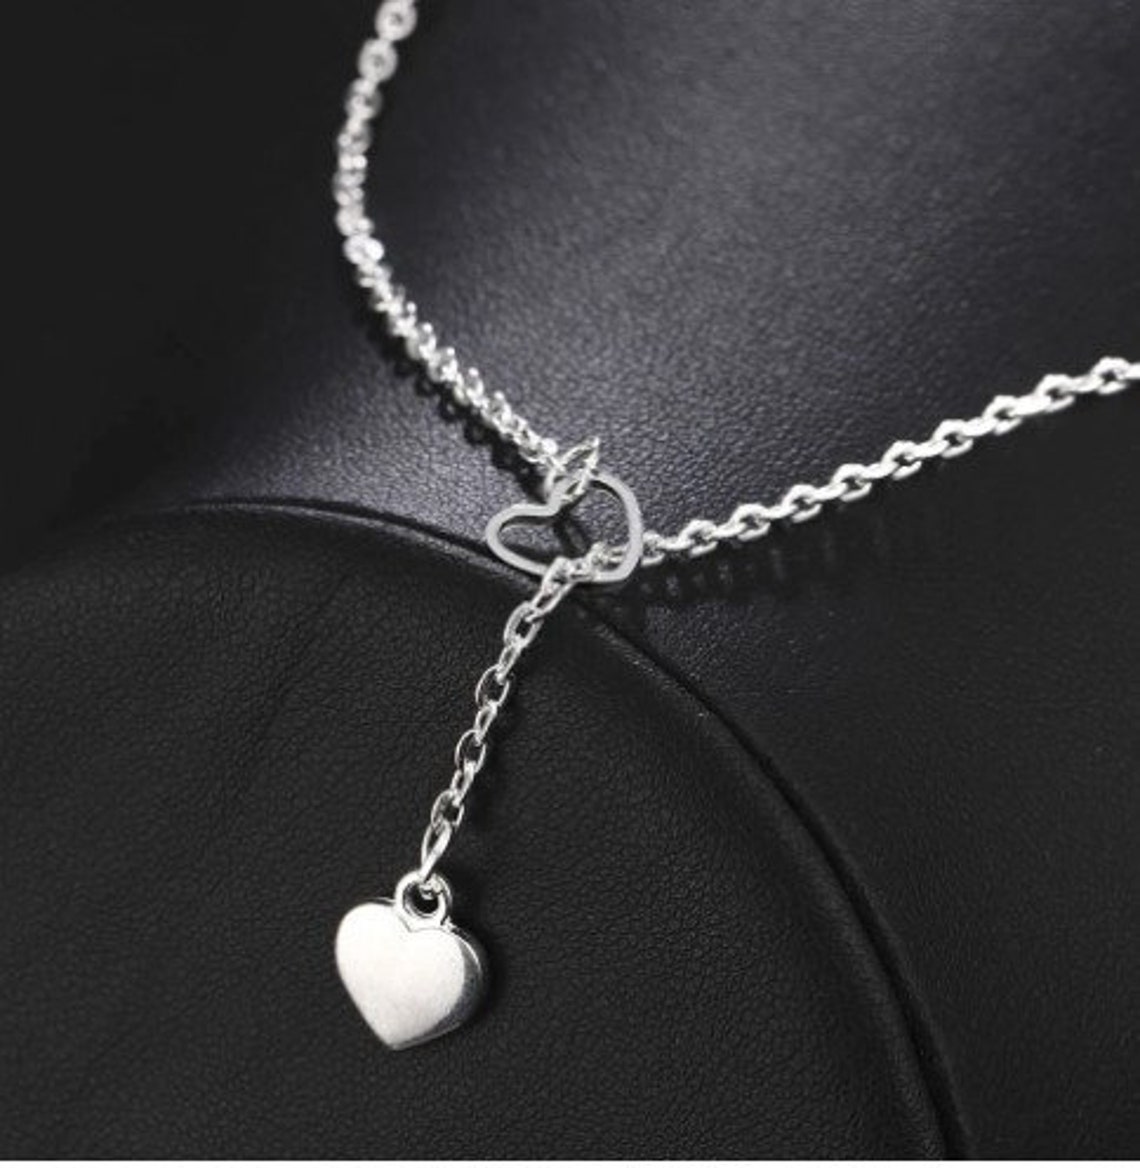 Heart Necklace Chain silver Color Heart Love Necklace - Etsy